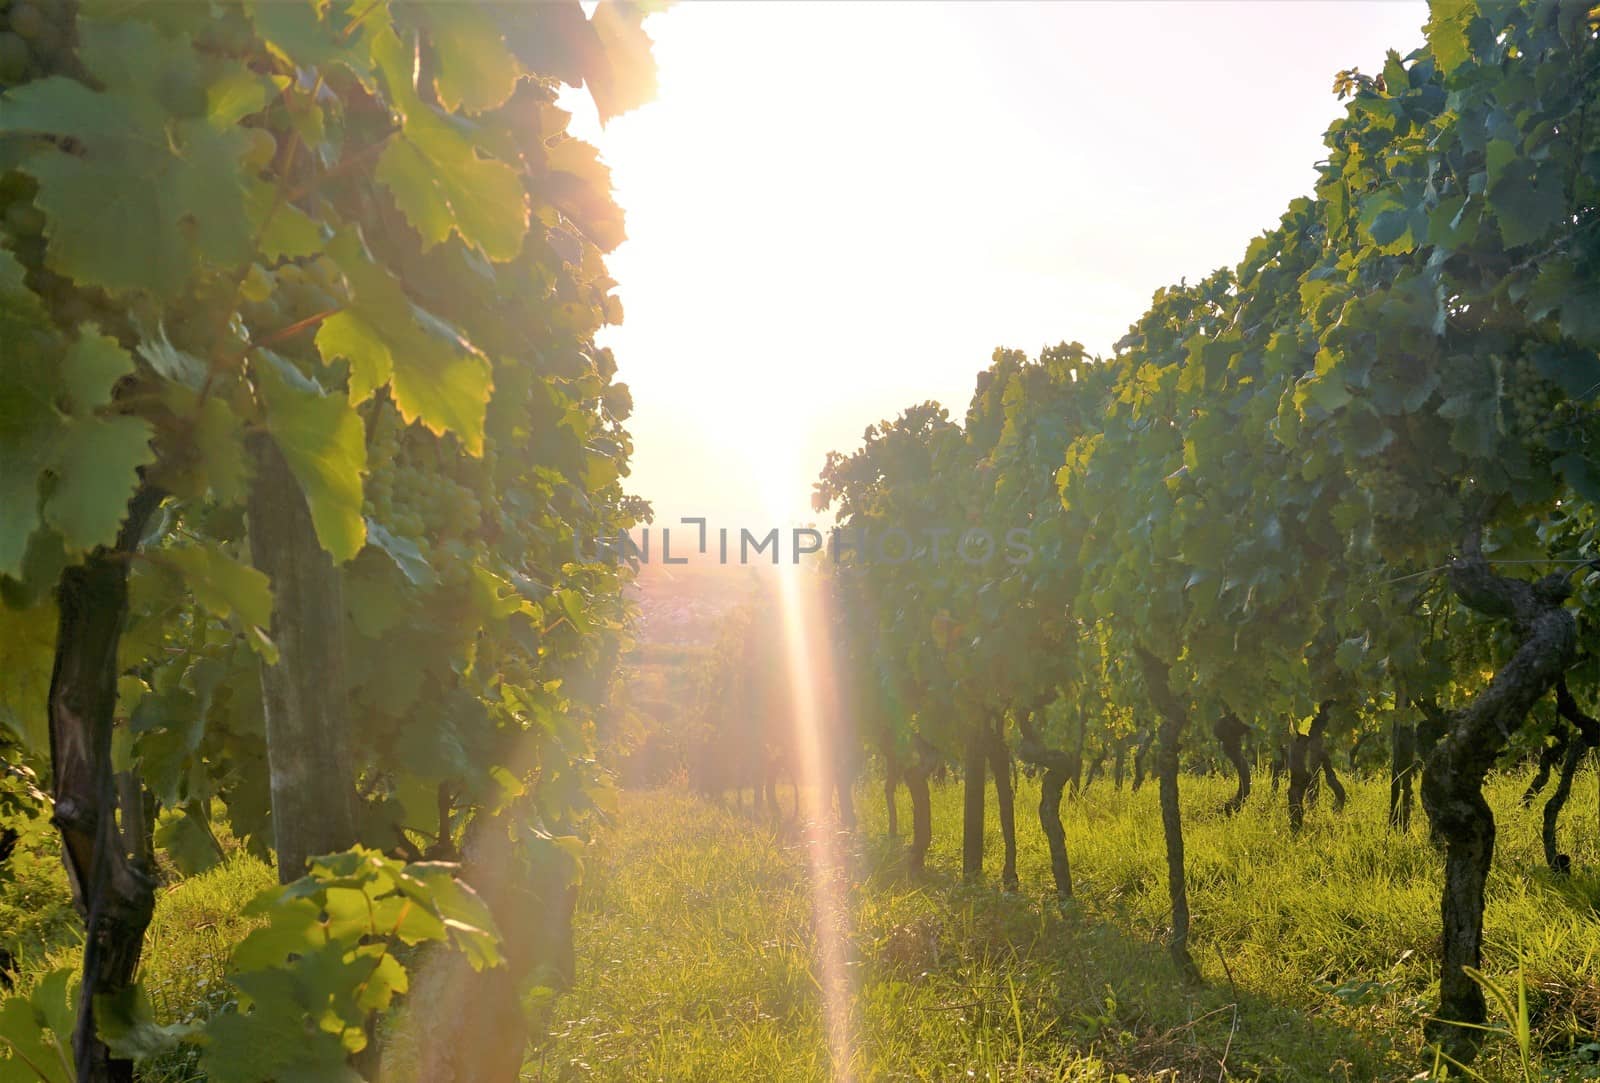 A vineyard in the sunshine by pisces2386